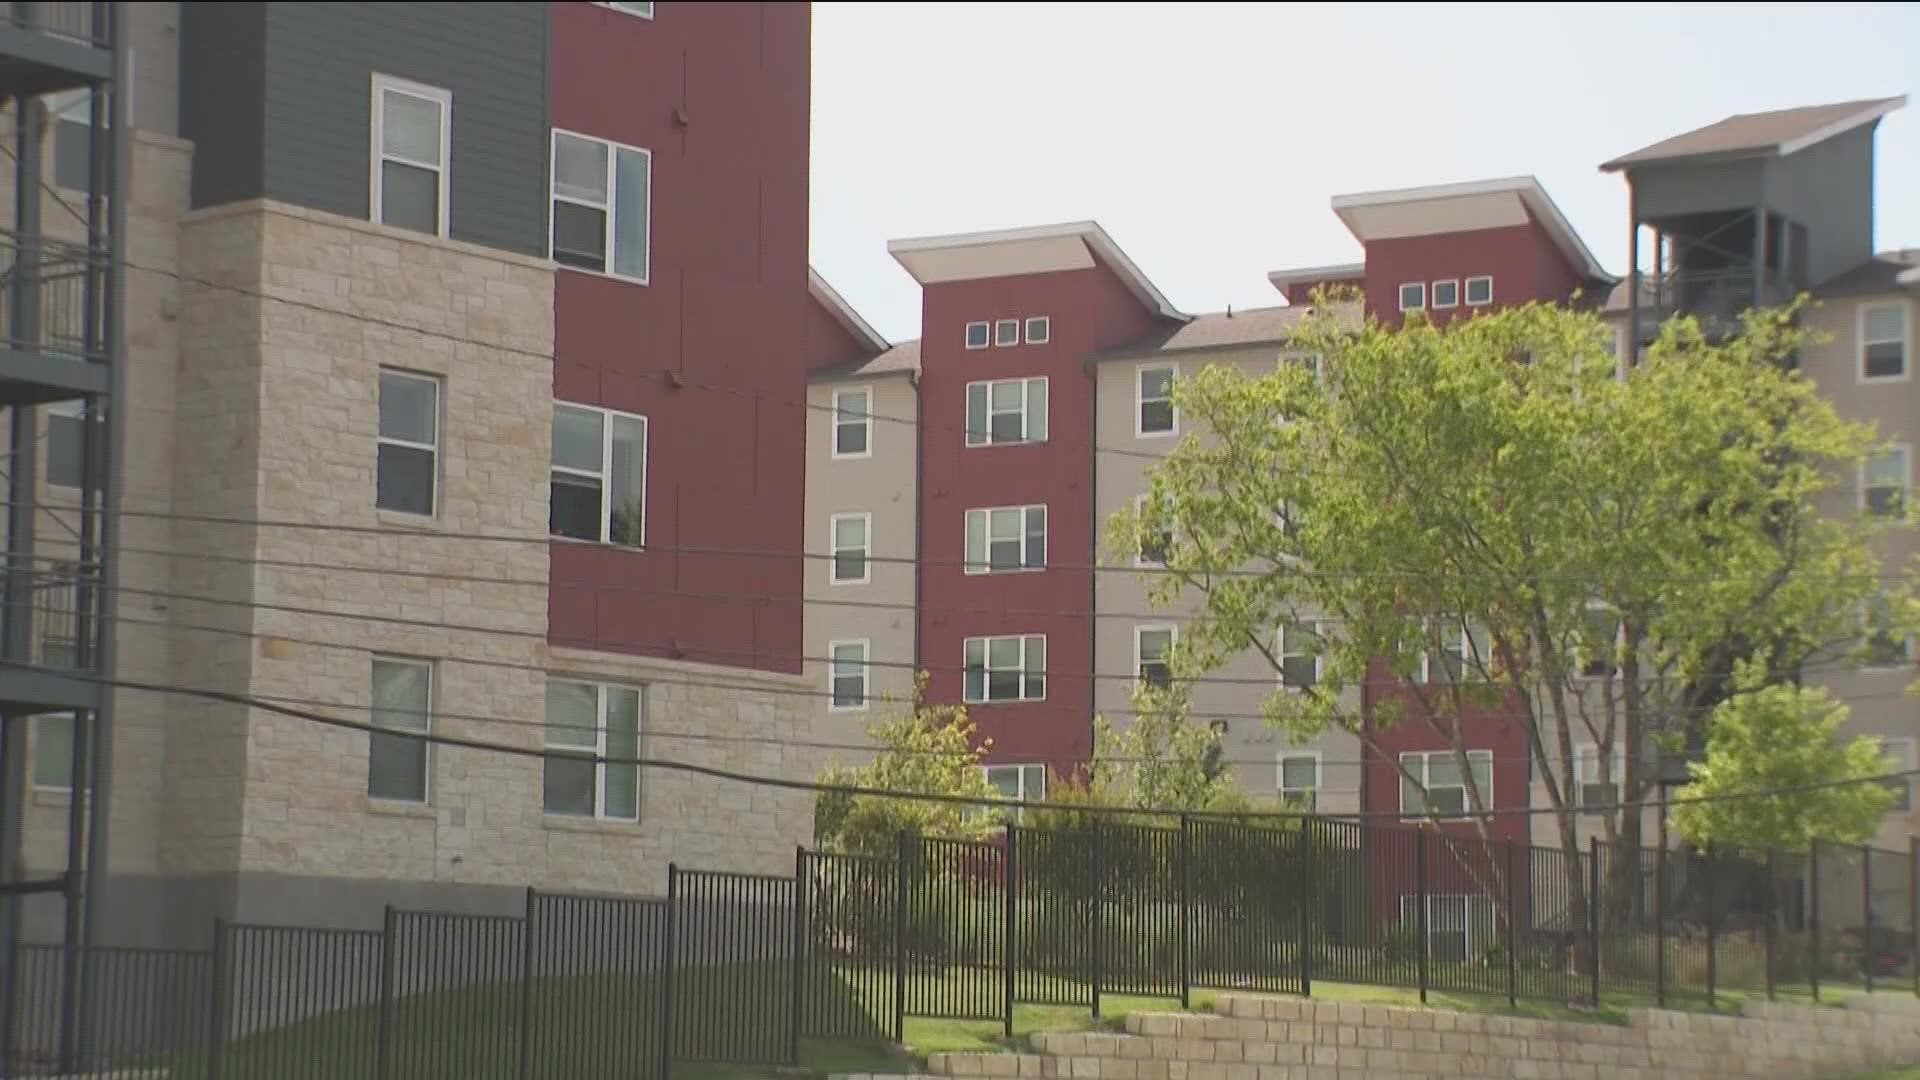 The Austin Affordable Housing Public Facilities Corporation will propose projects aiming to receive federal bond funds.